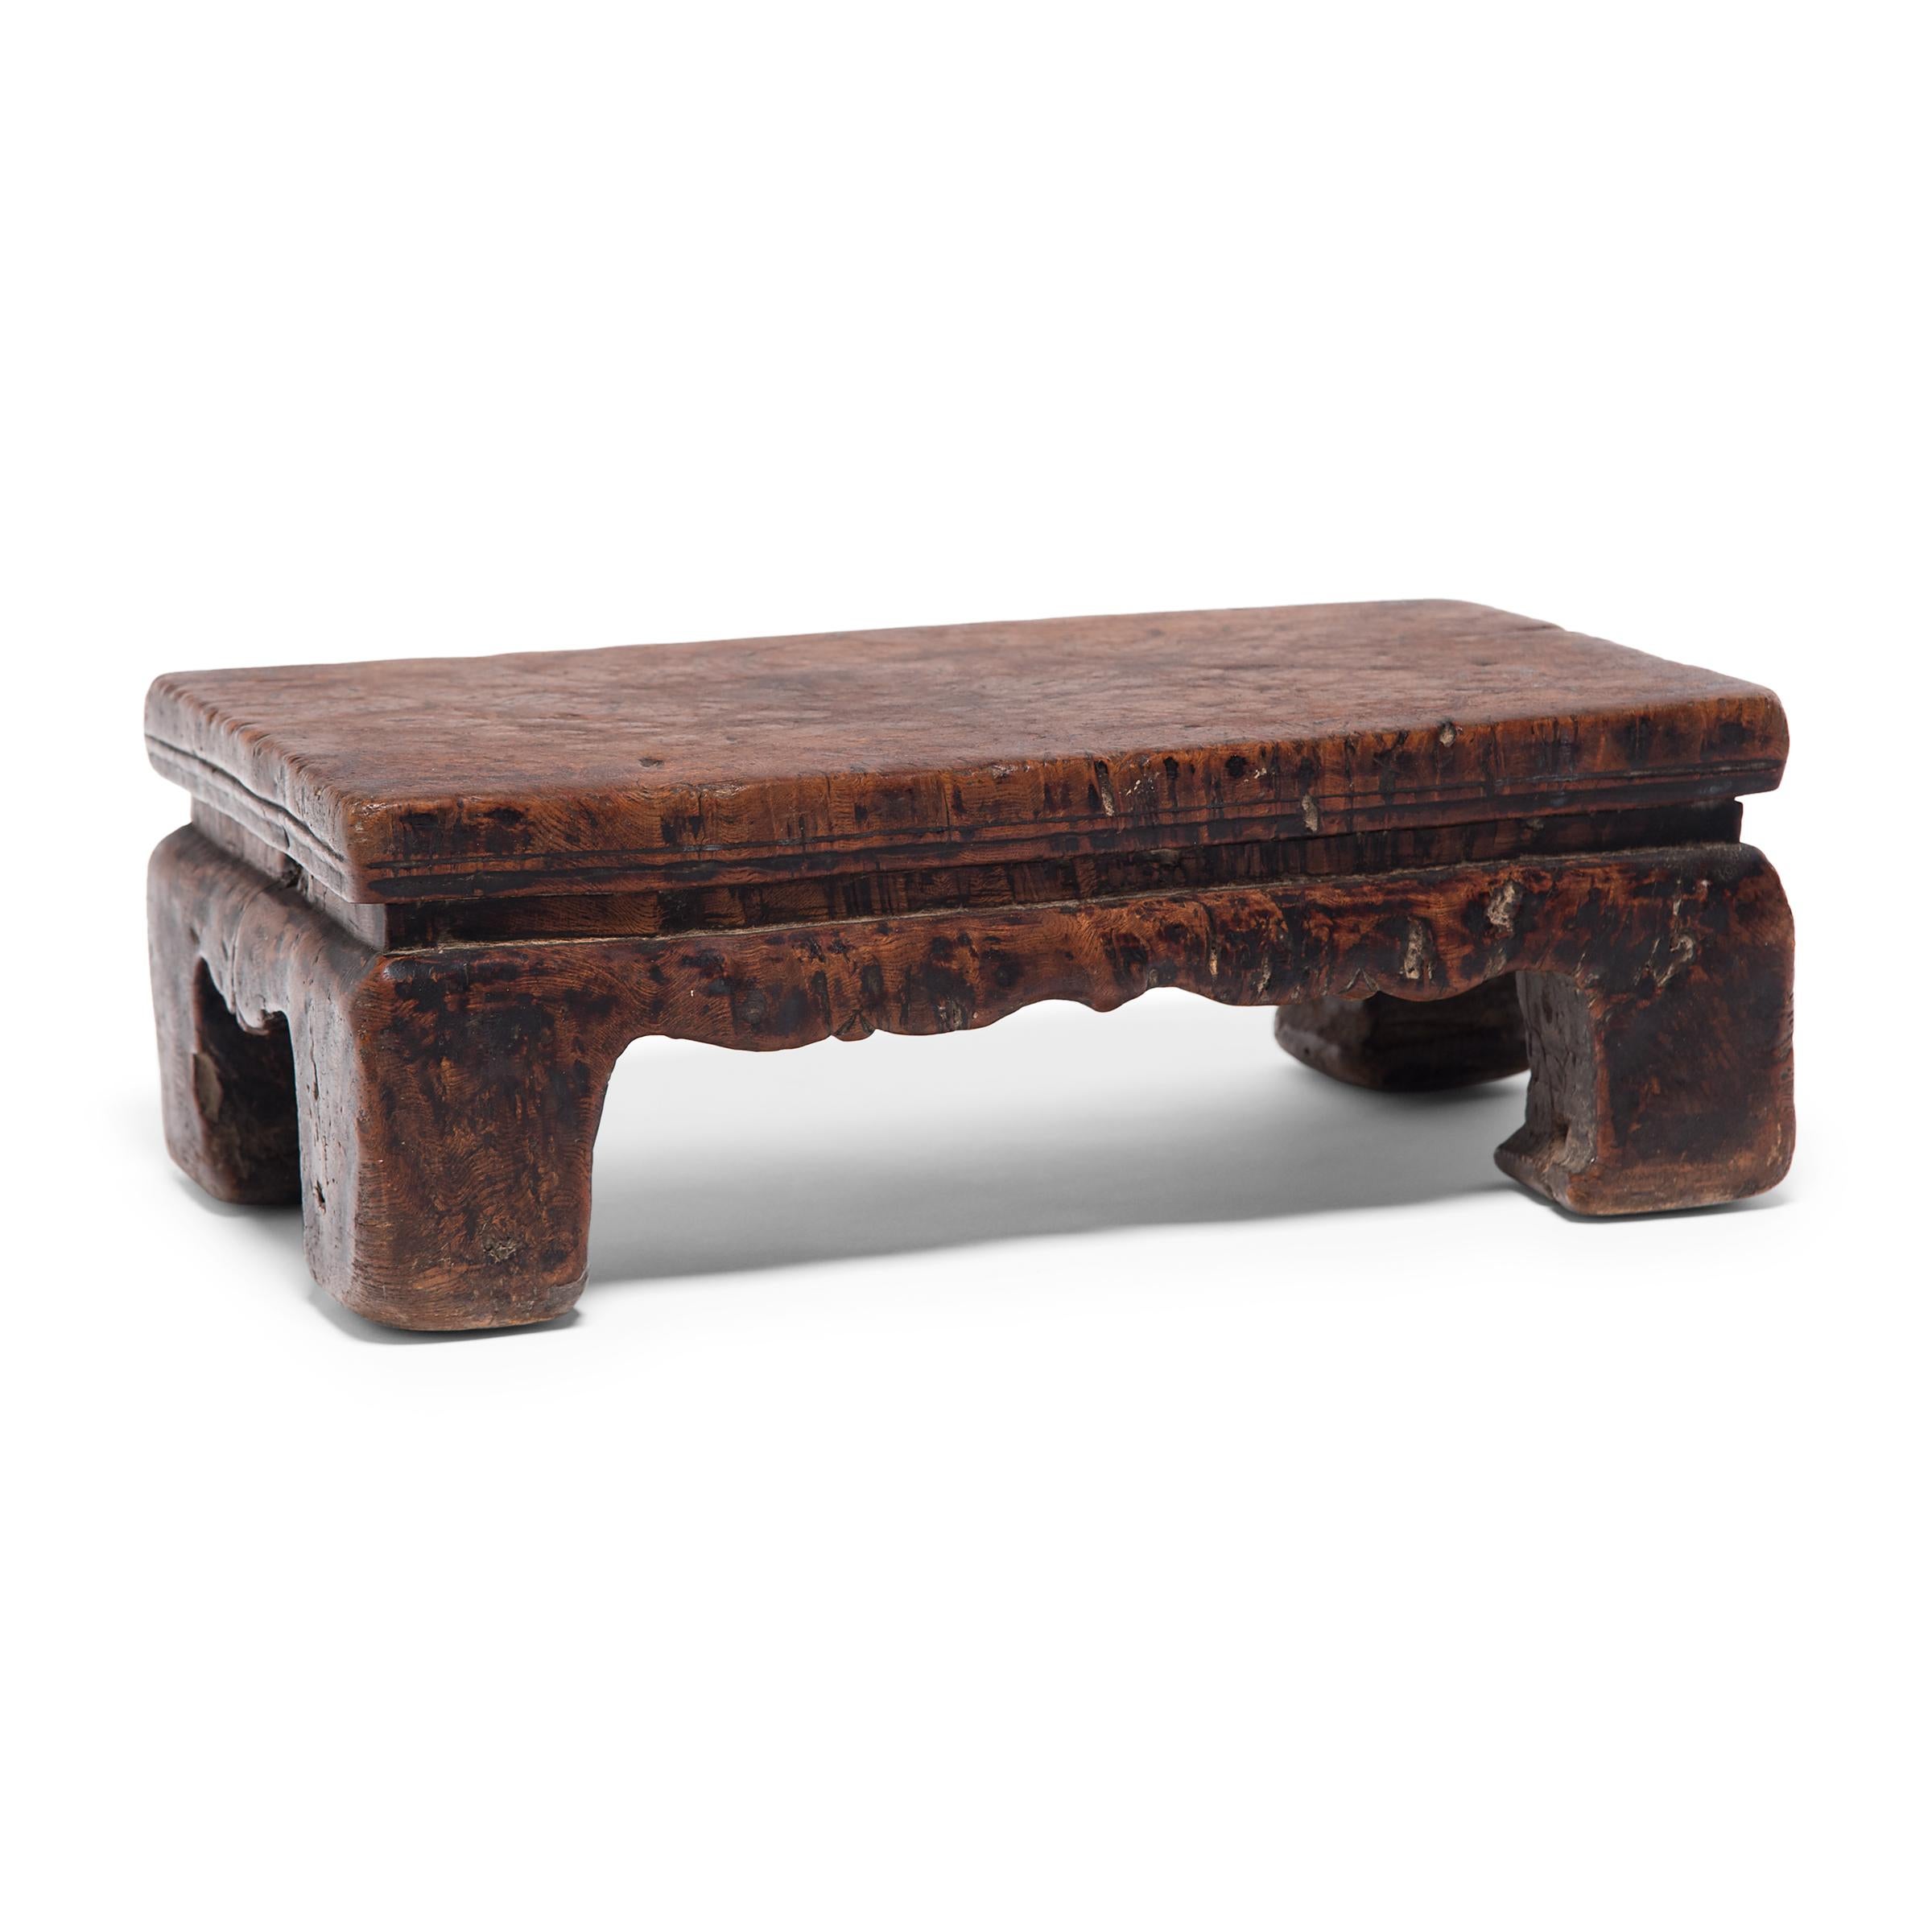 Carved Chinese Burlwood Table Stand, circa 1850